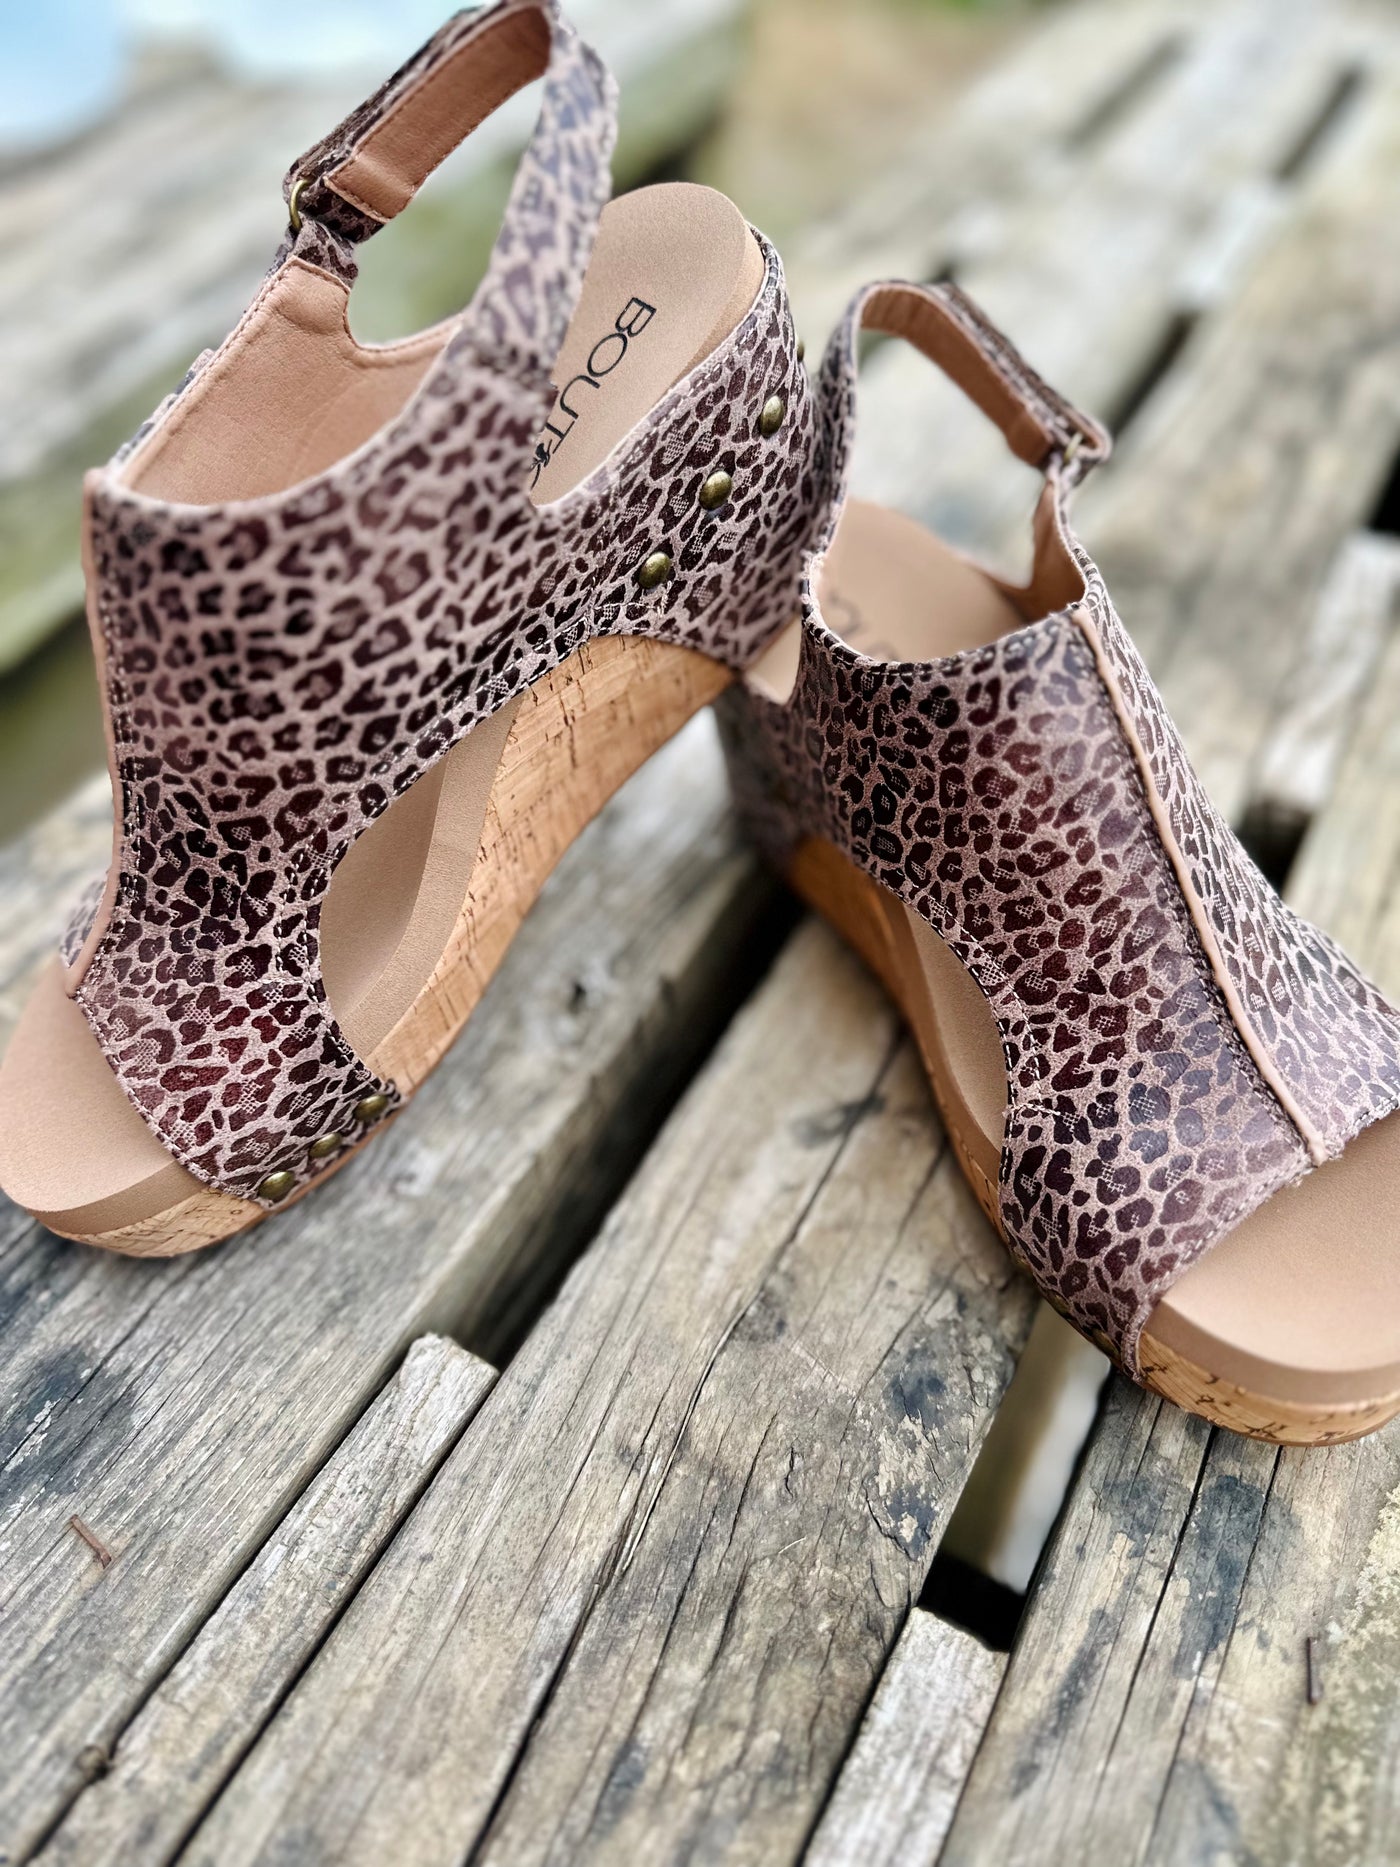 Carley Platform Wedge in Small Leopard by Corky's